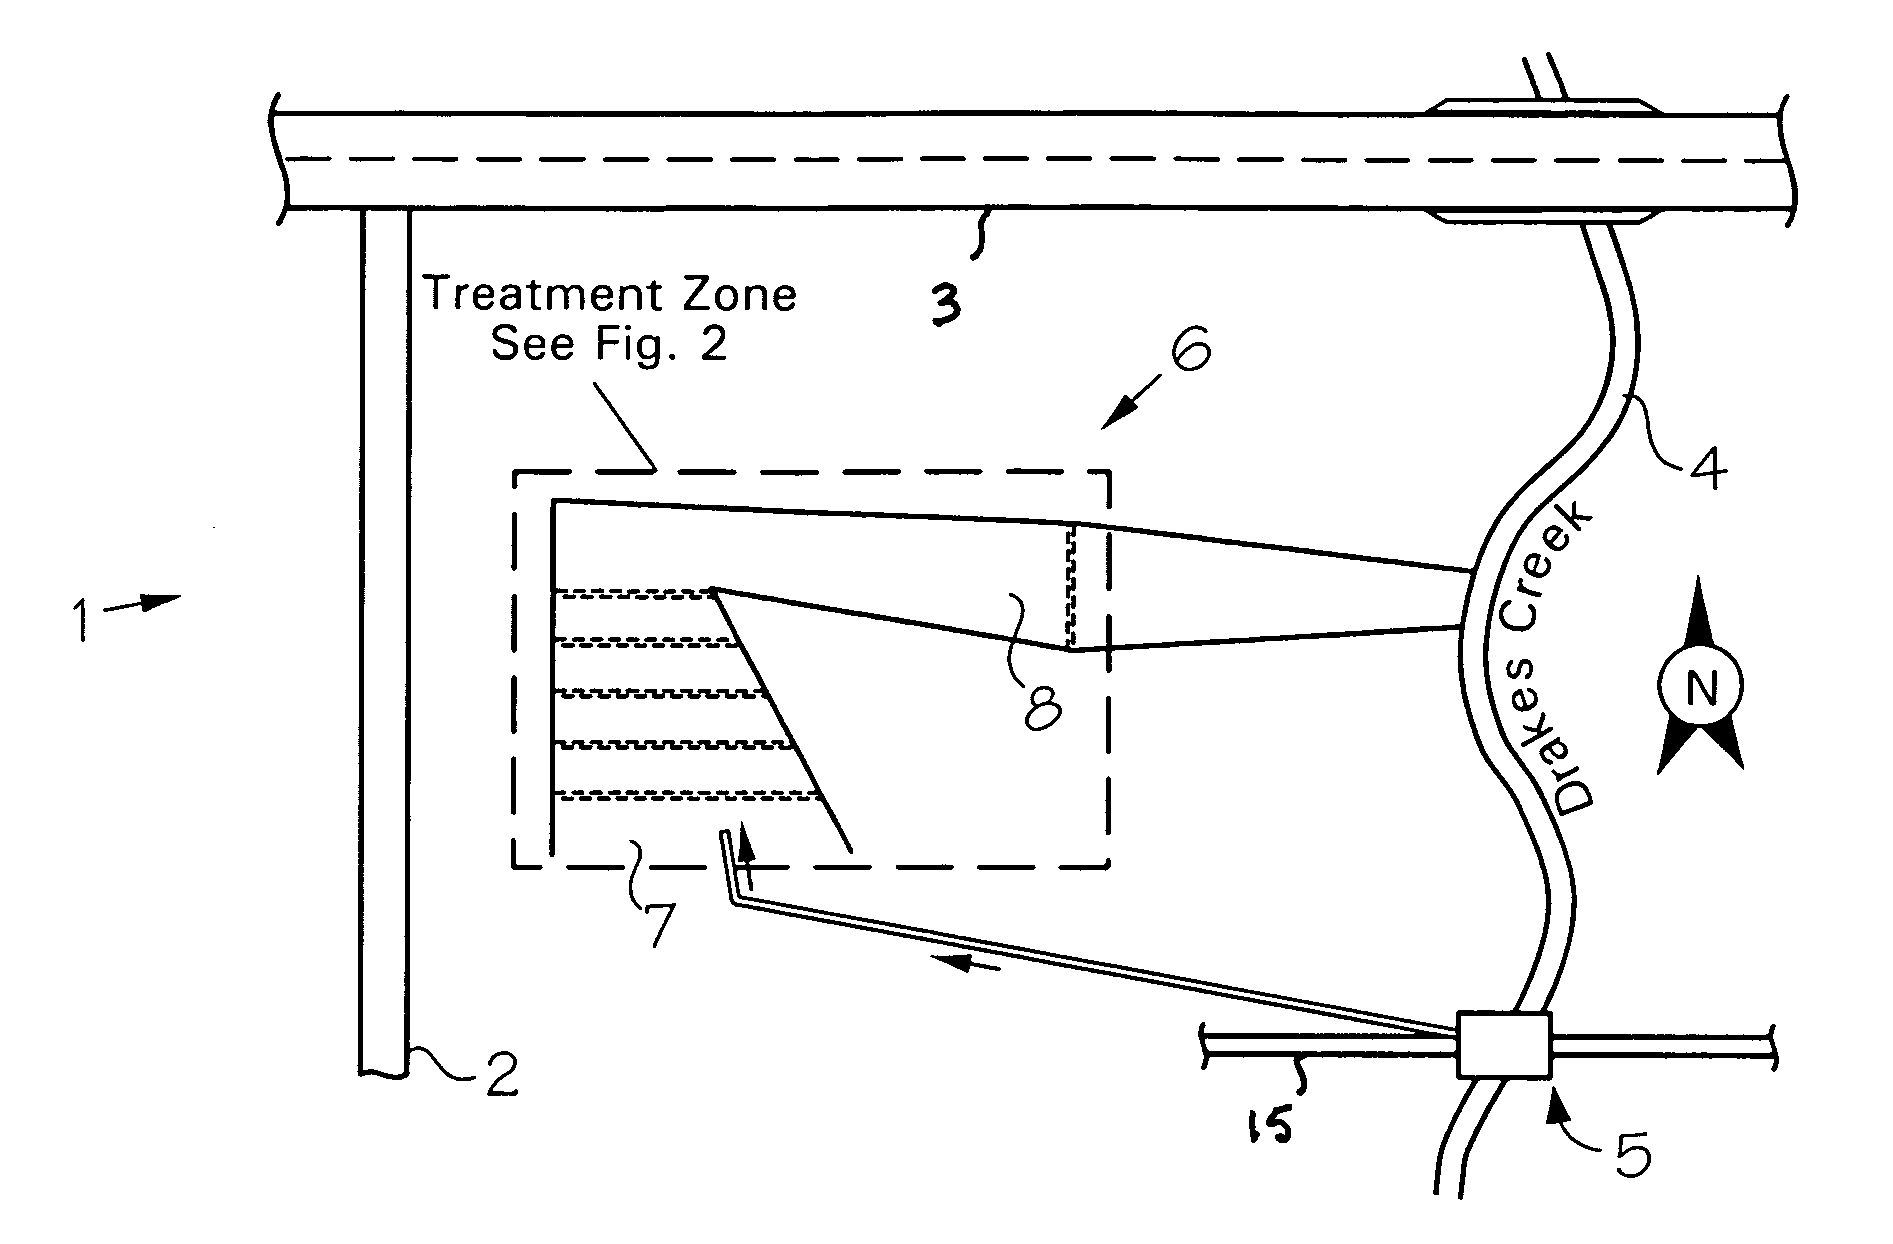 Method for dewatering slurry from construction sites